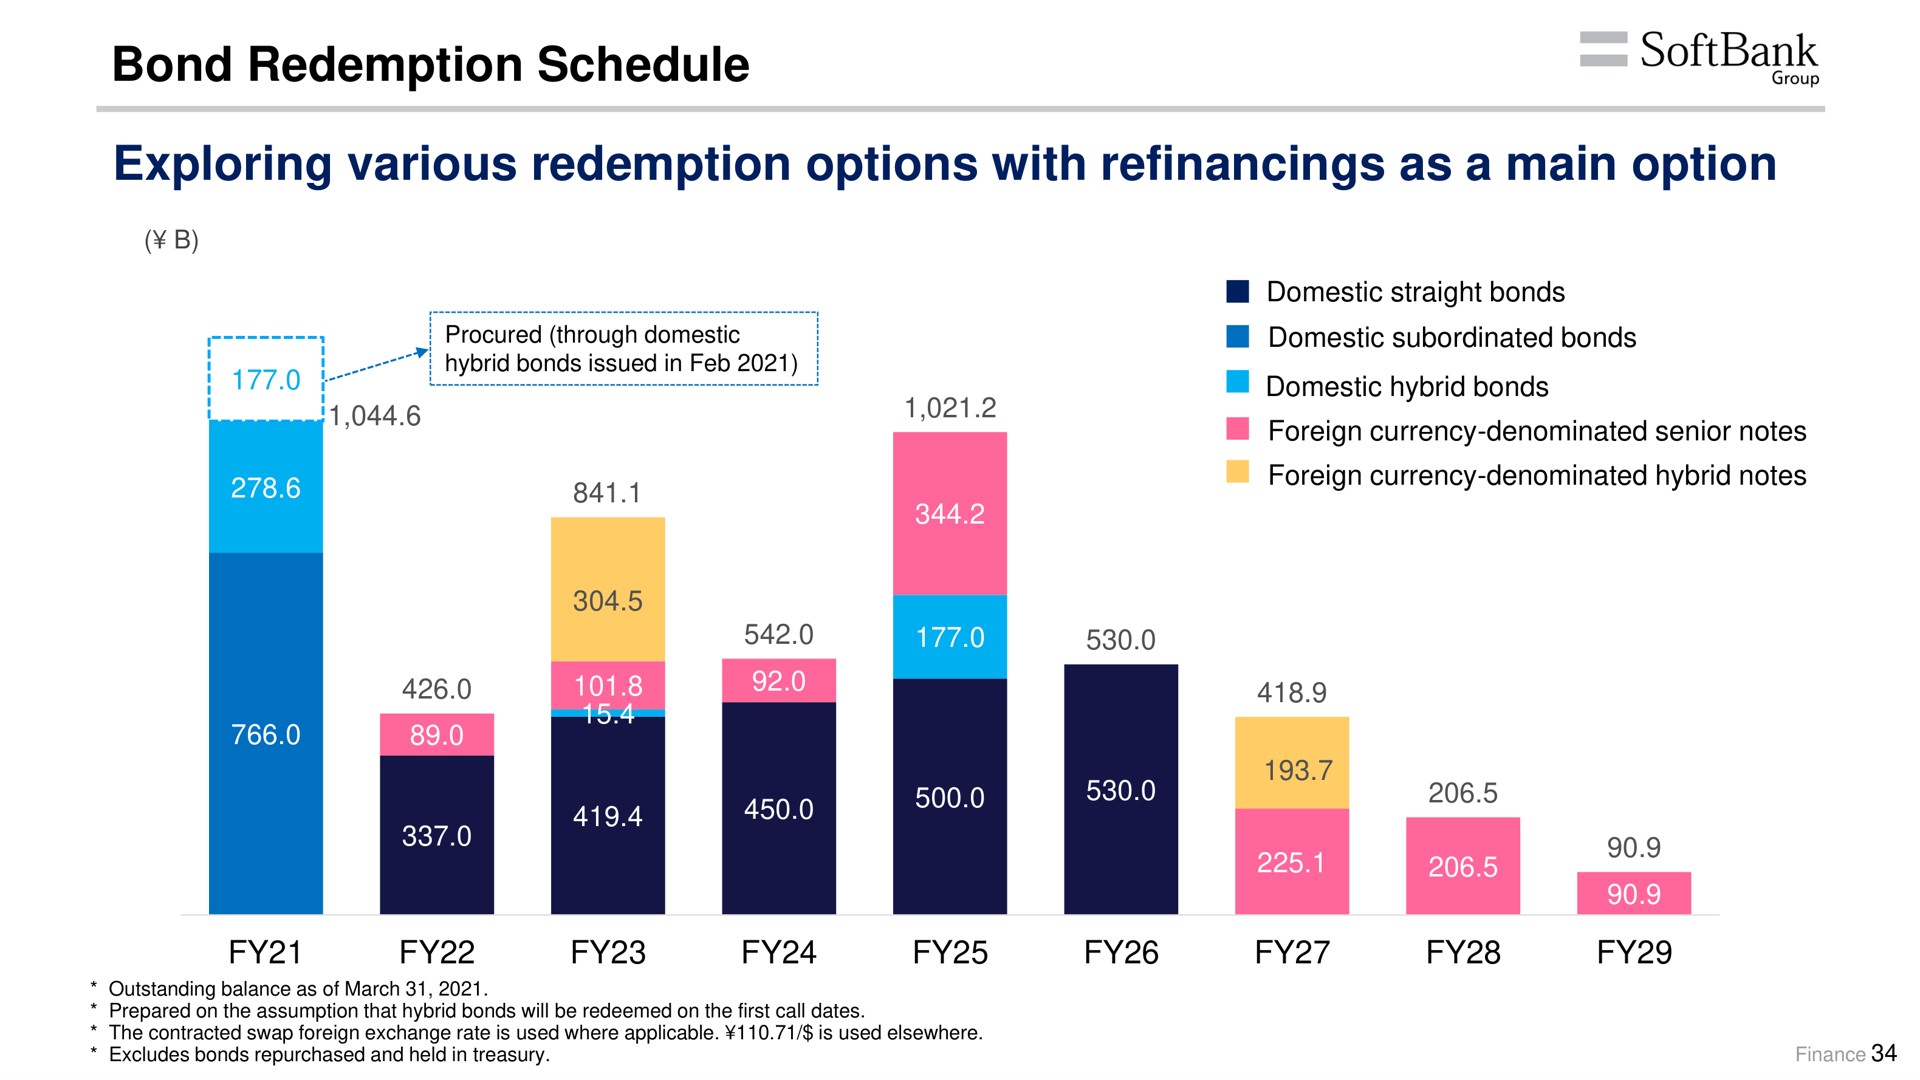 bond redemption schedule exploring various redemption options with refinancings as a main option | SoftBank